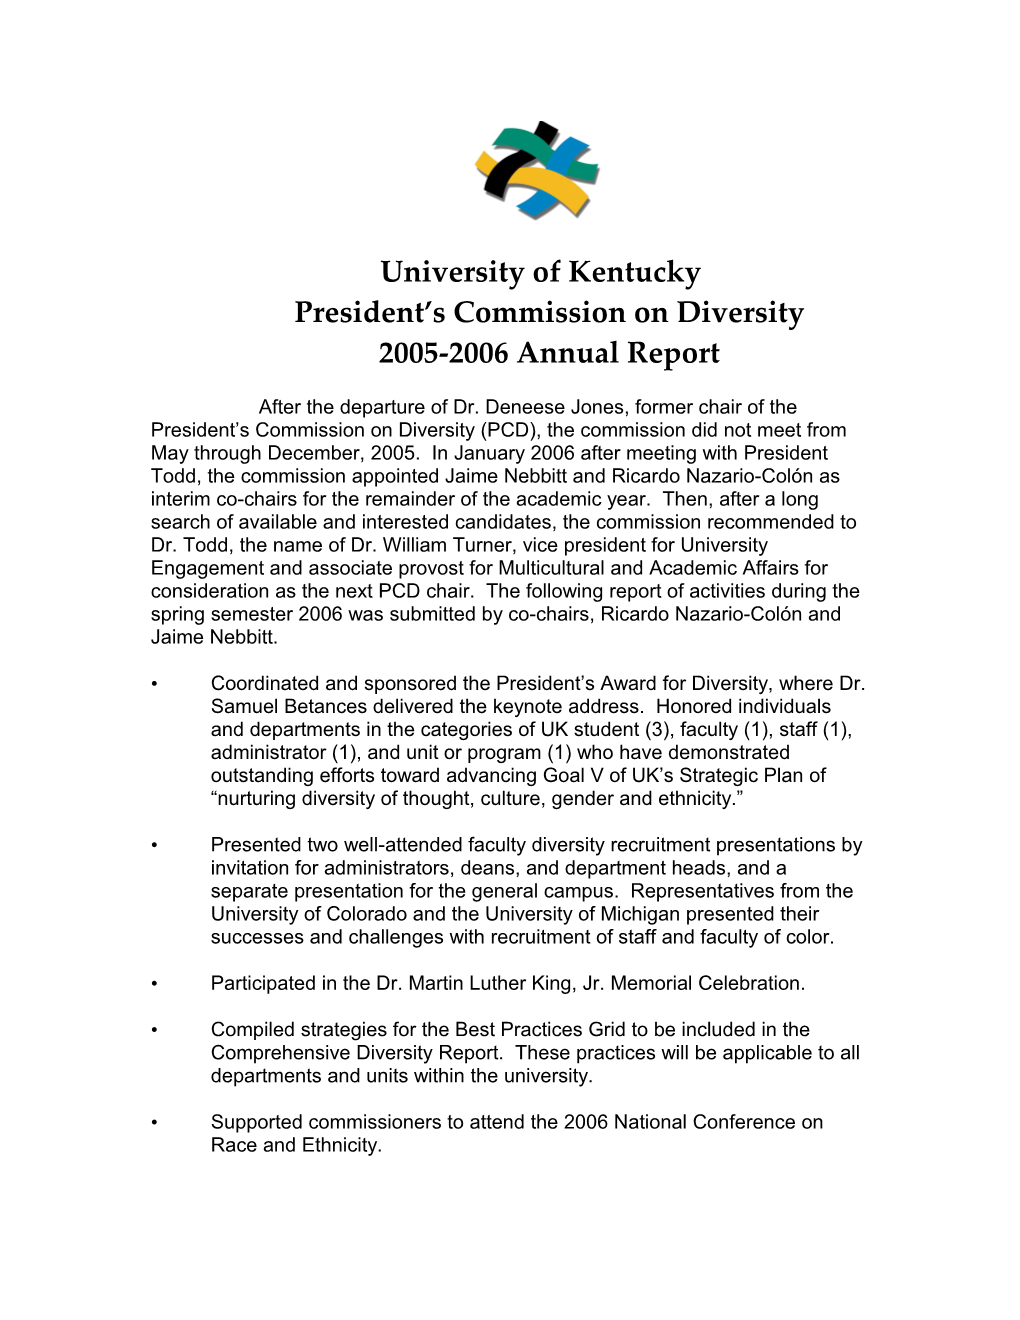 University of Kentucky President S Commission on Diversity 2005-2006 Annual Report